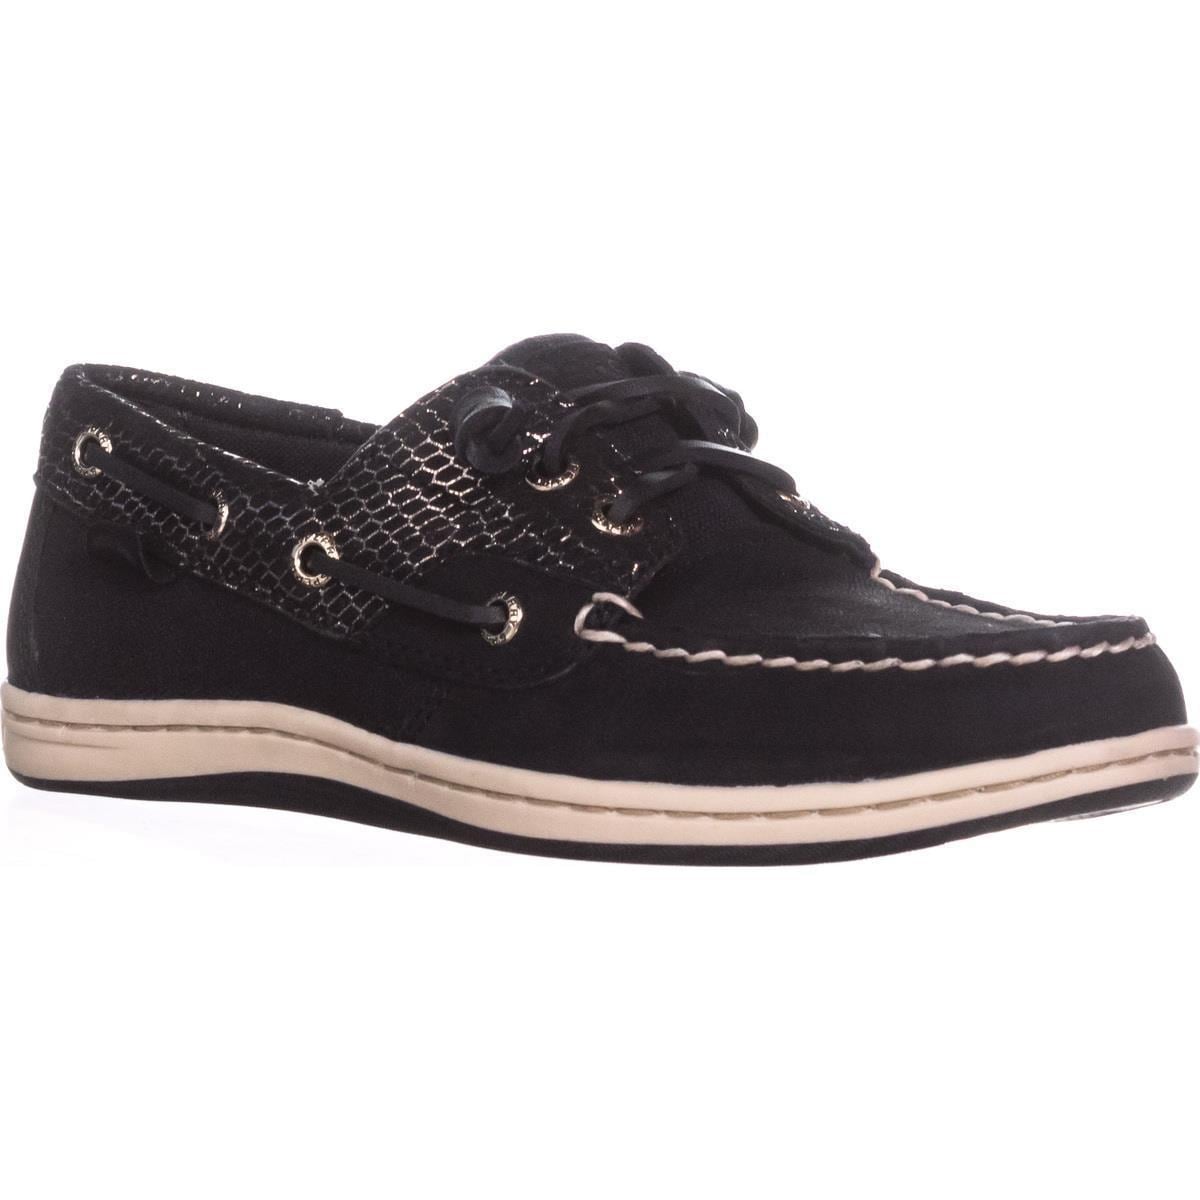 Sperry Top-Sider Songfish Boat Shoes 